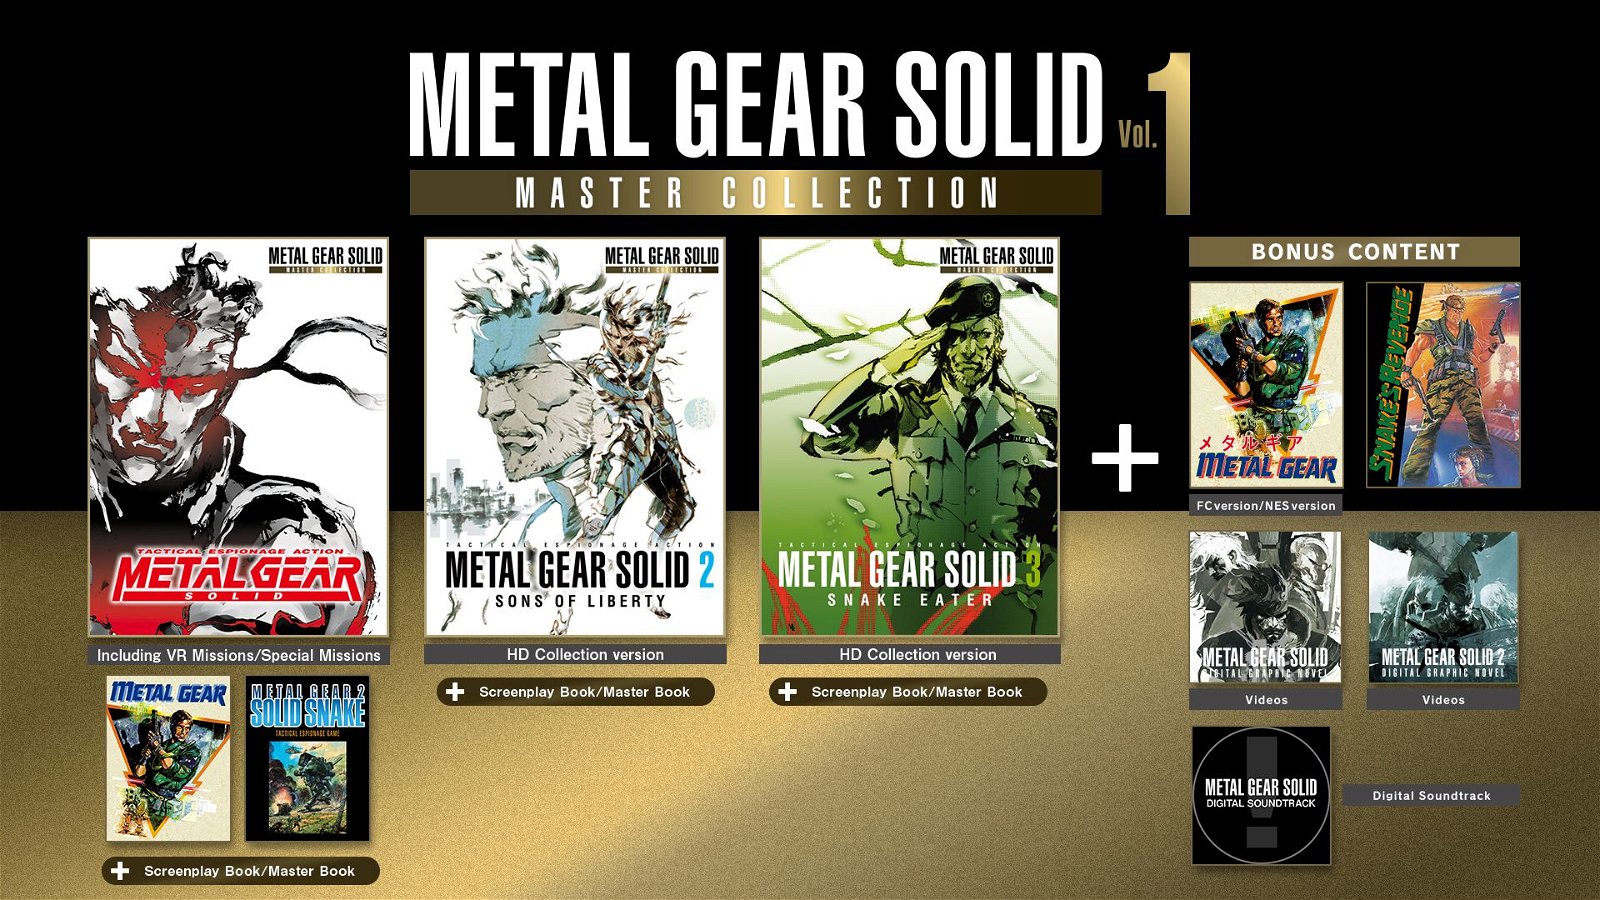 Image of METAL GEAR SOLID: MASTER COLLECTION Vol. 1